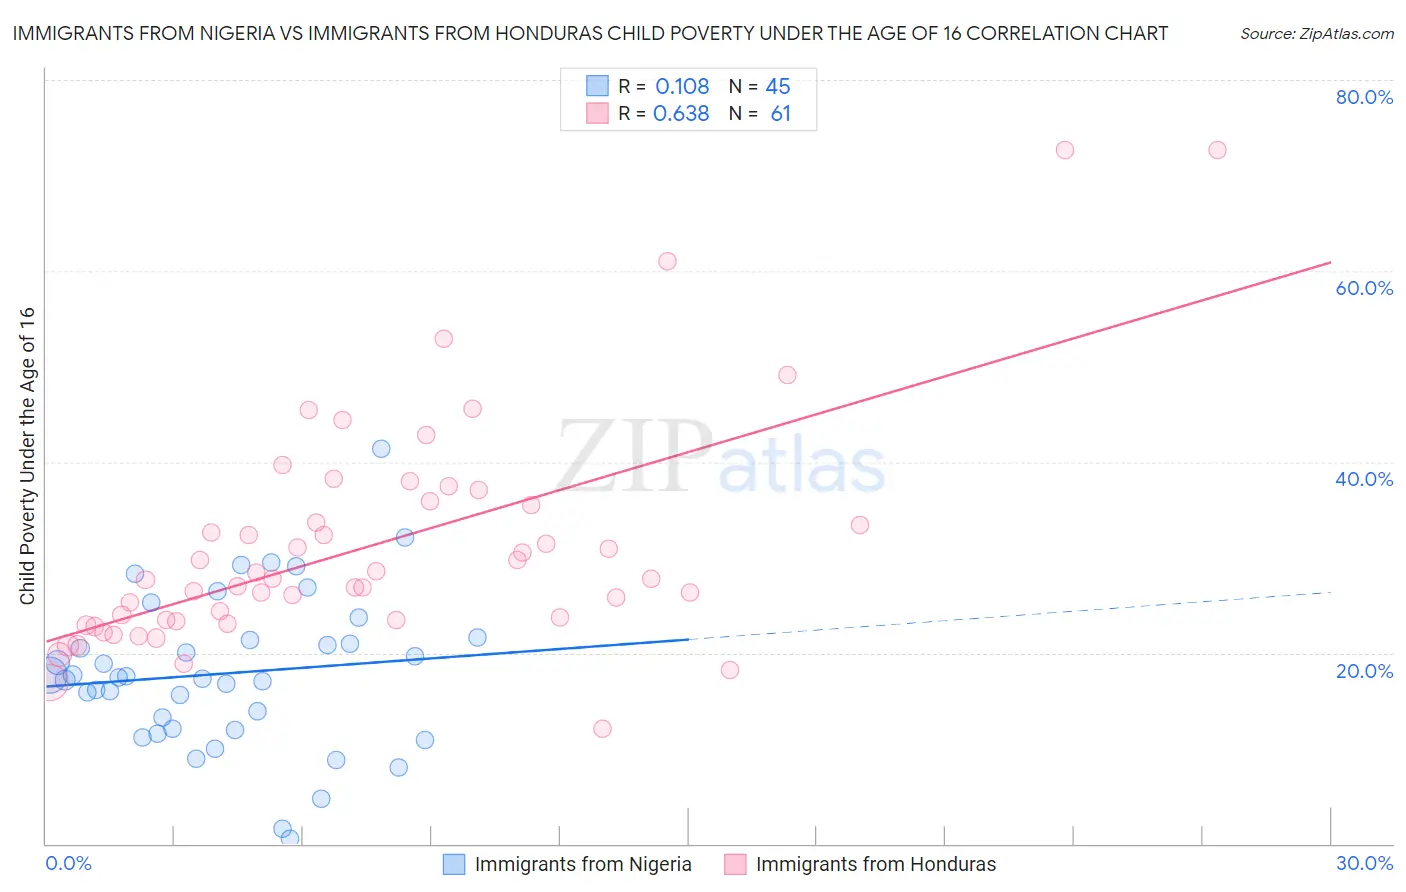 Immigrants from Nigeria vs Immigrants from Honduras Child Poverty Under the Age of 16